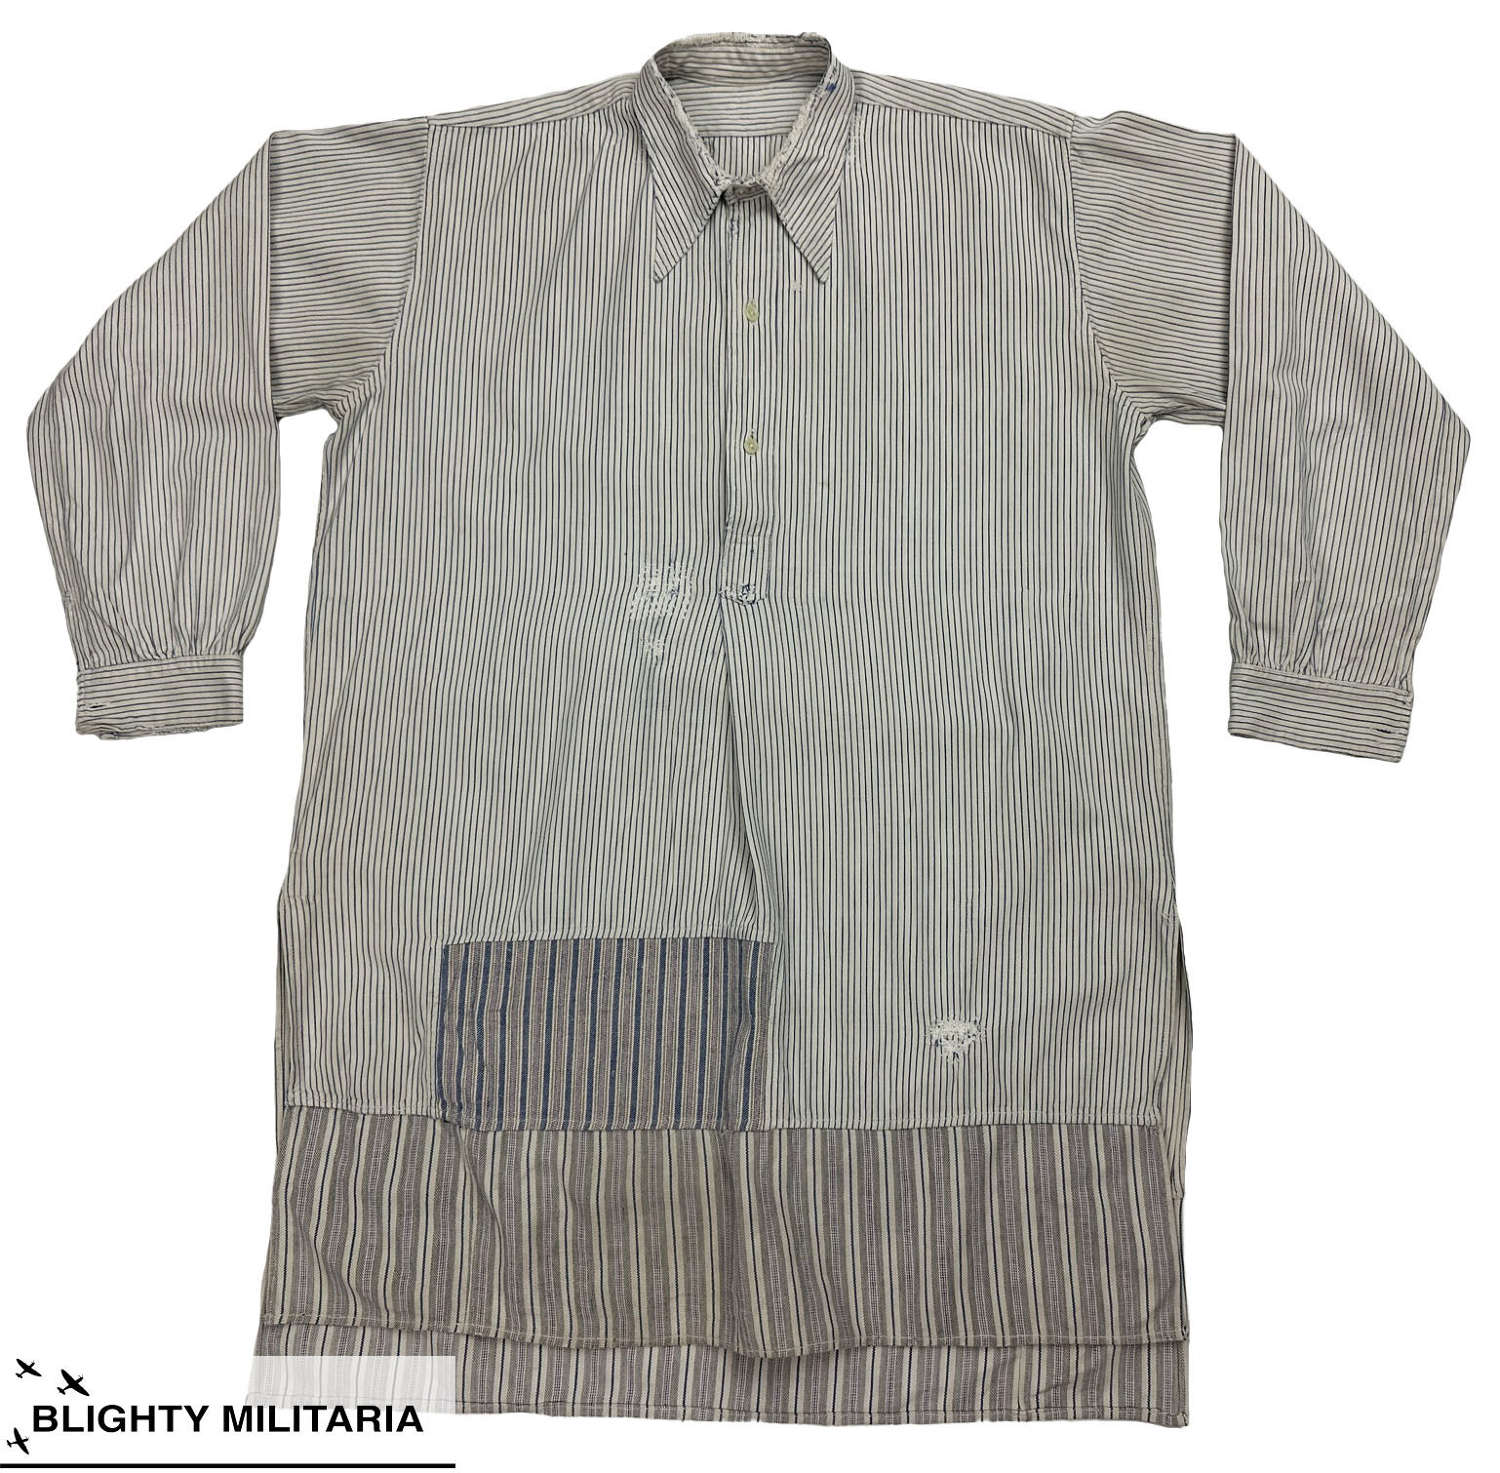 Original 1940s French Spearpoint Collared Shirt